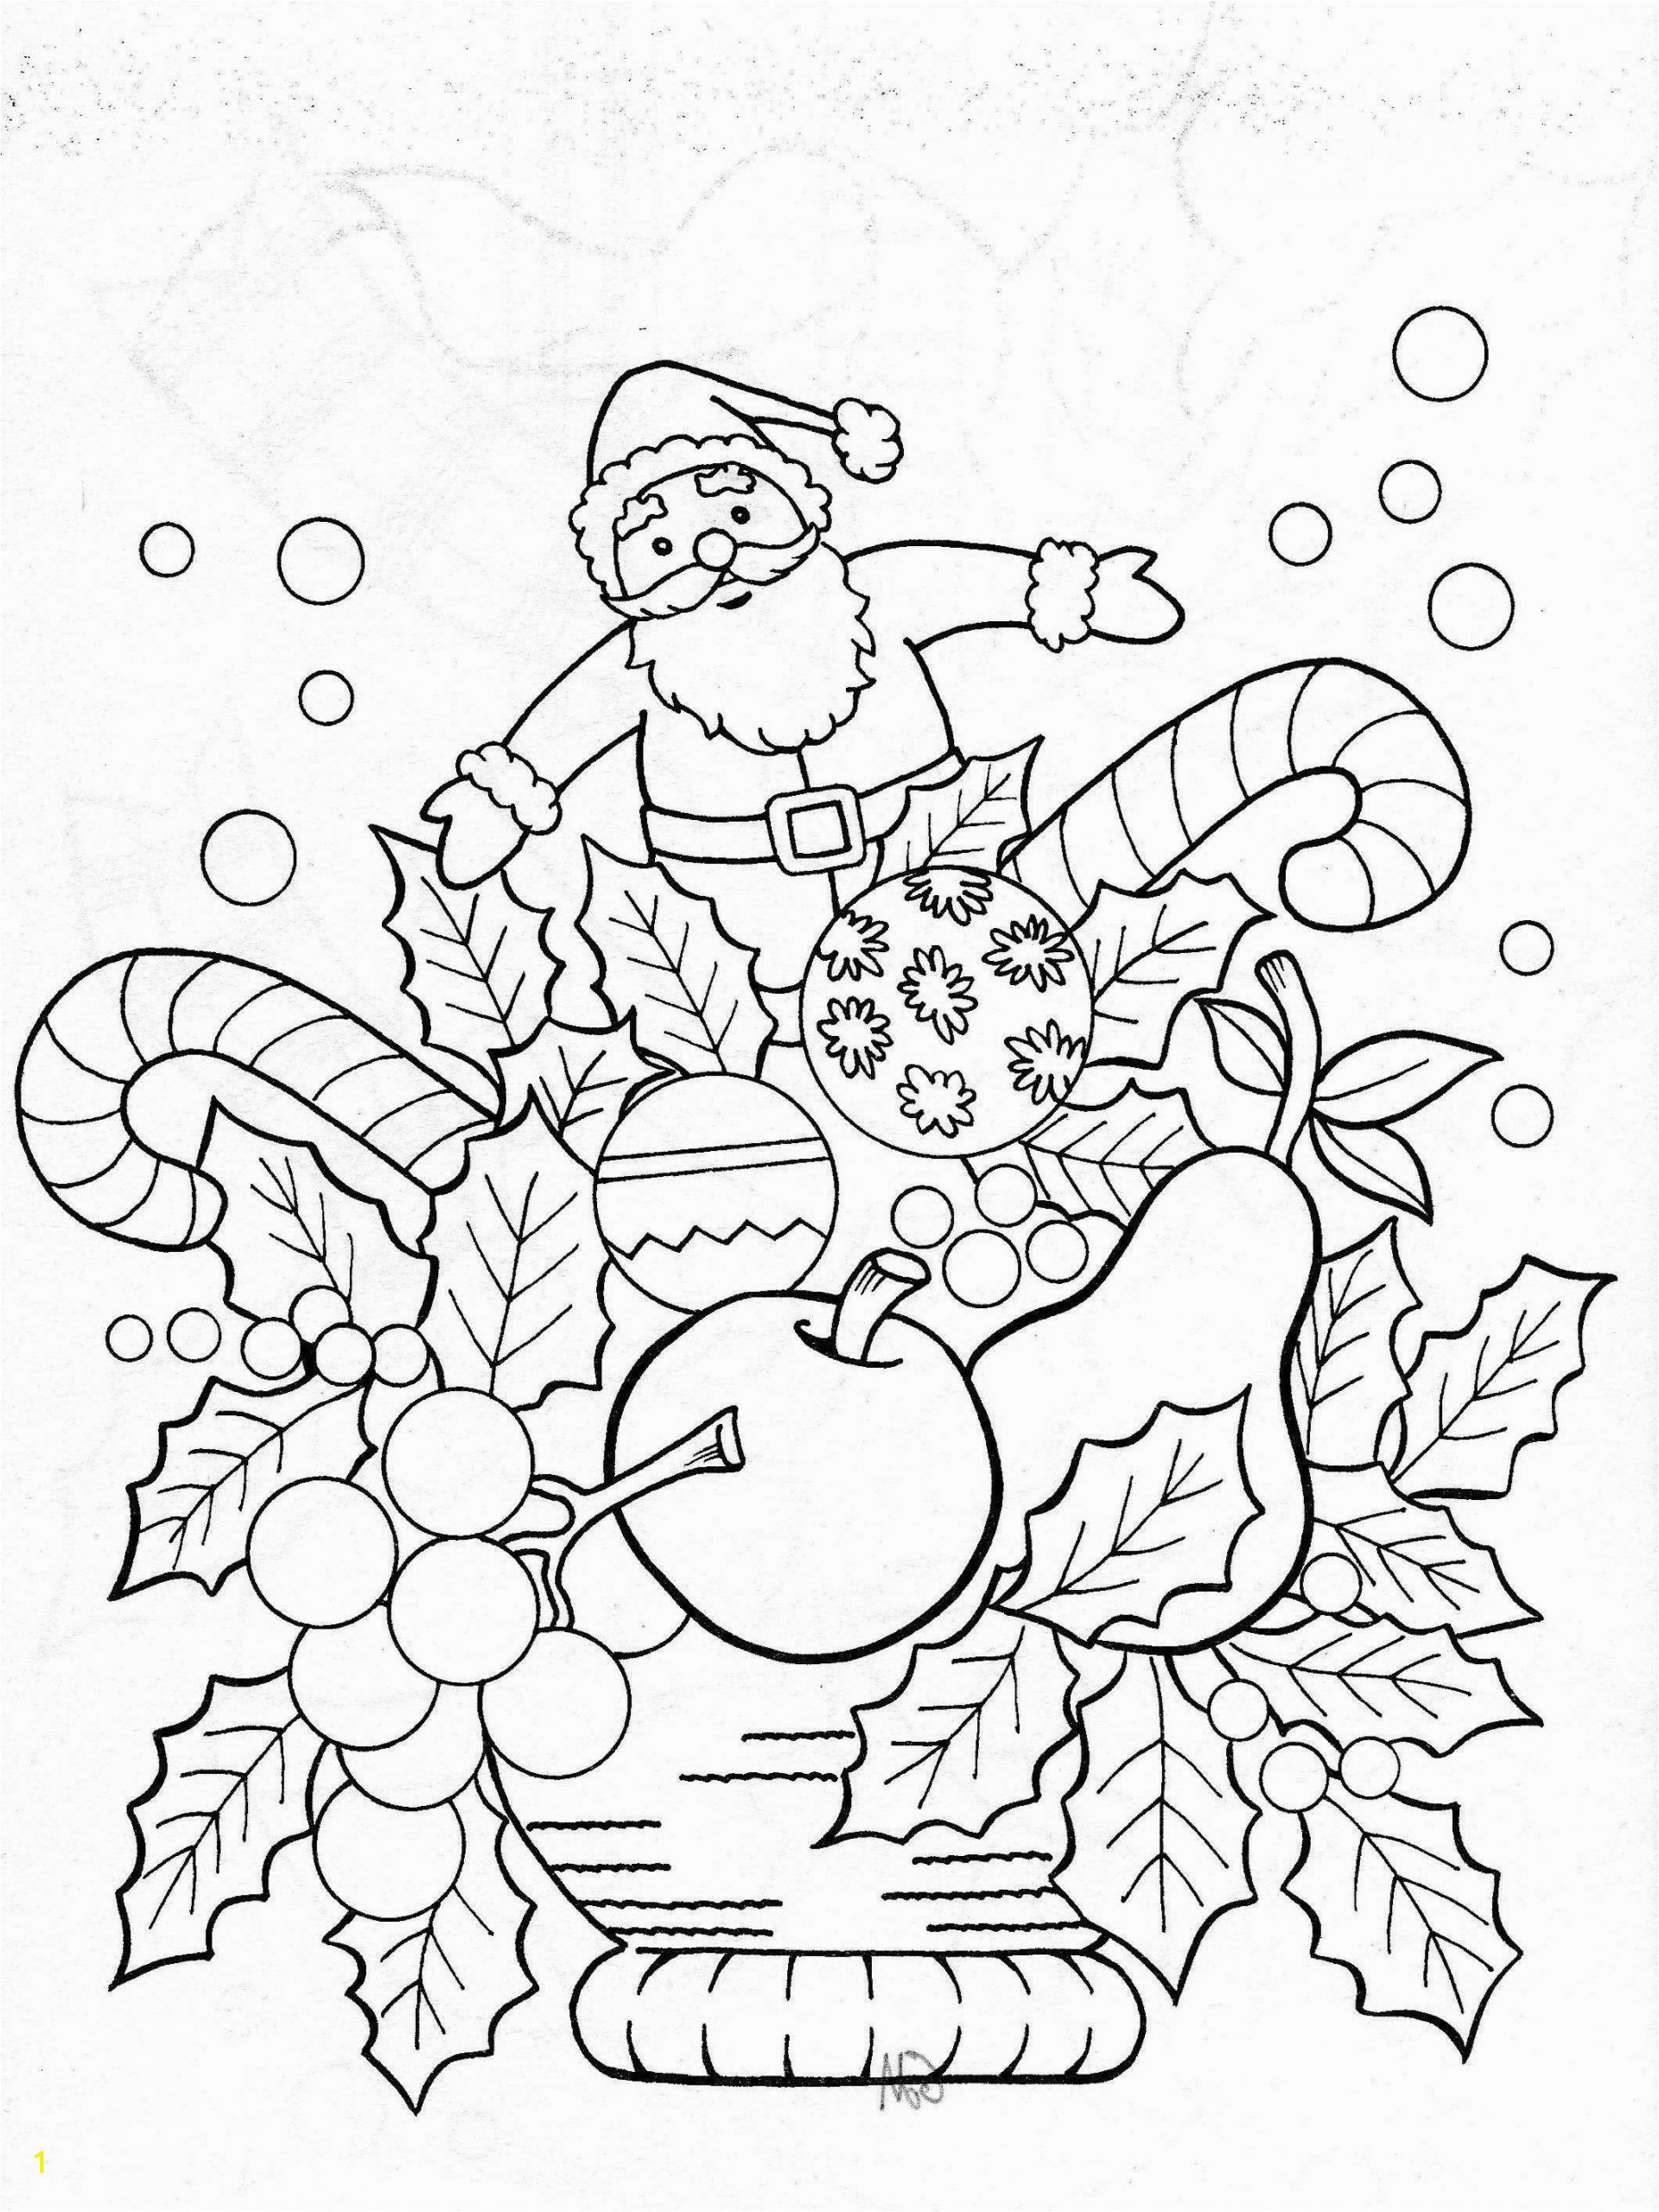 Coloring Pages for Grade 2 28 Awesome Image Interesting Coloring Page Dengan Gambar